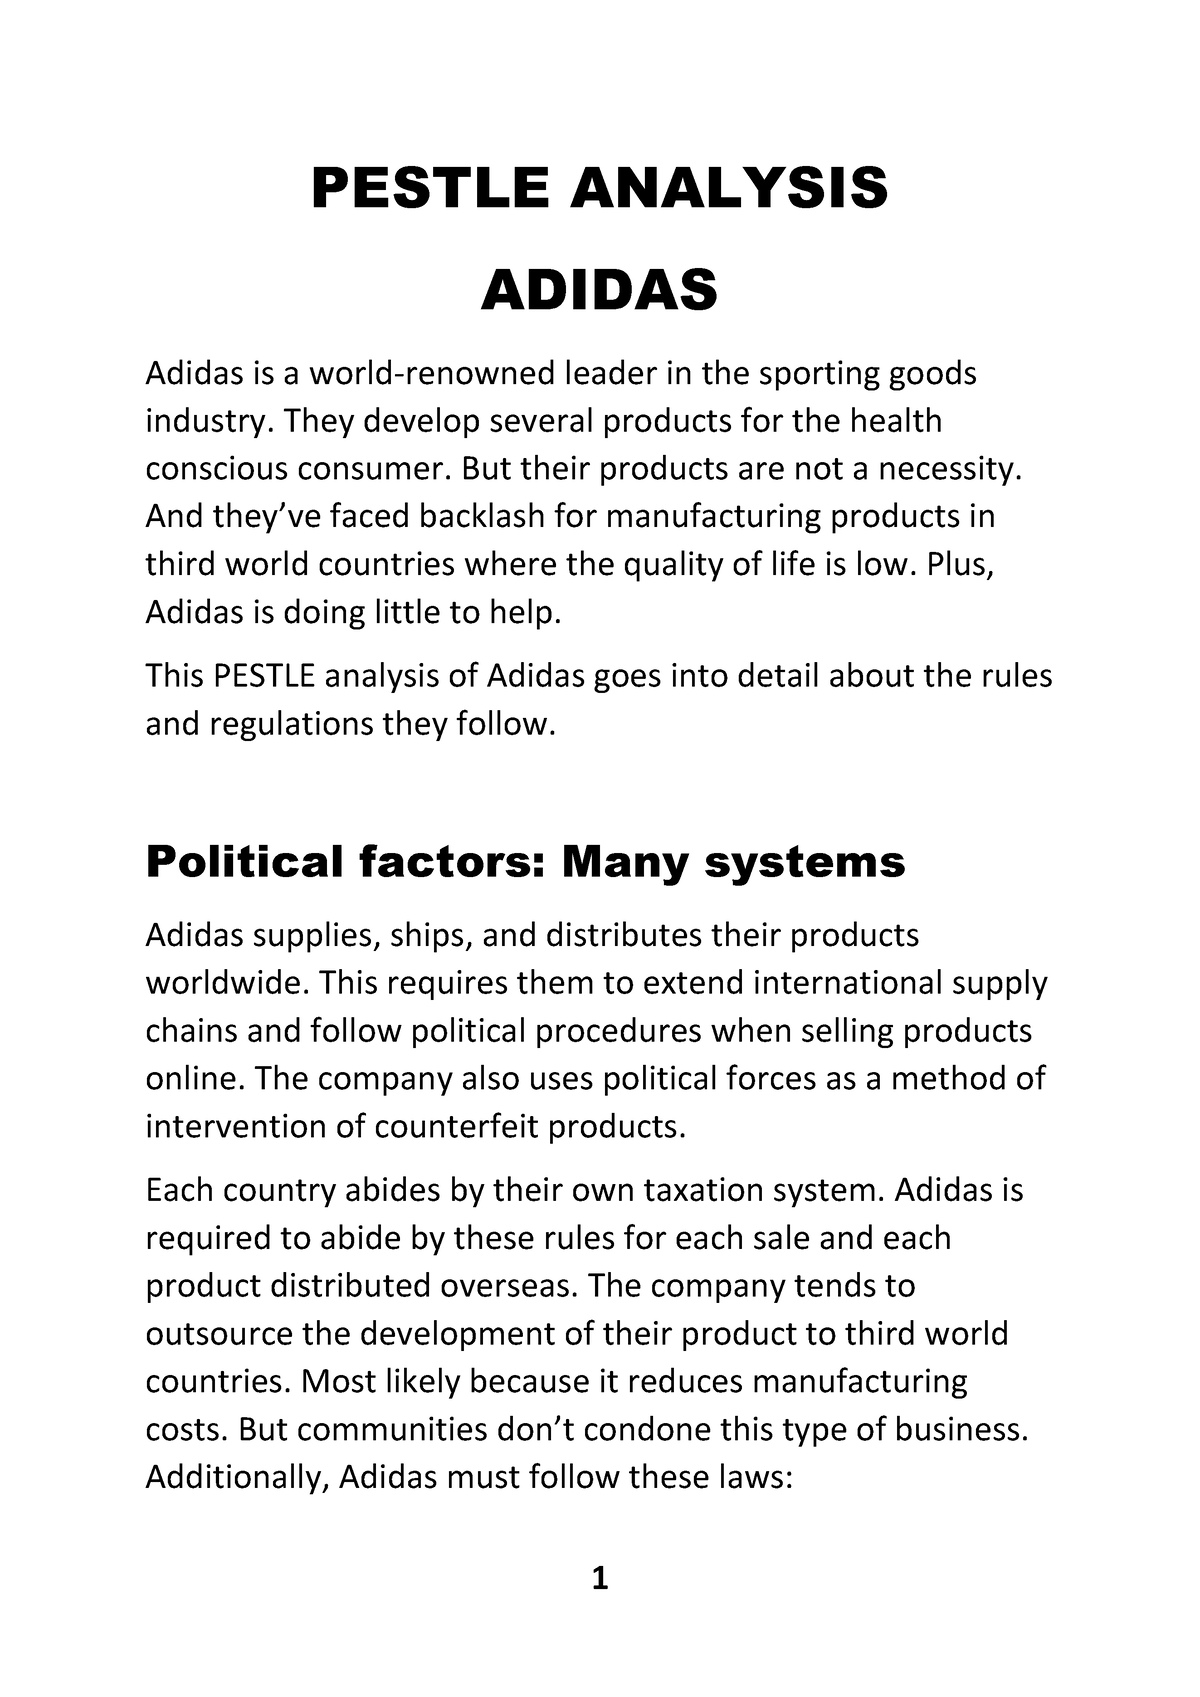 Pestle Analysis - PESTLE ANALYSIS ADIDAS Adidas is a world-renowned leader in sporting goods - Studocu